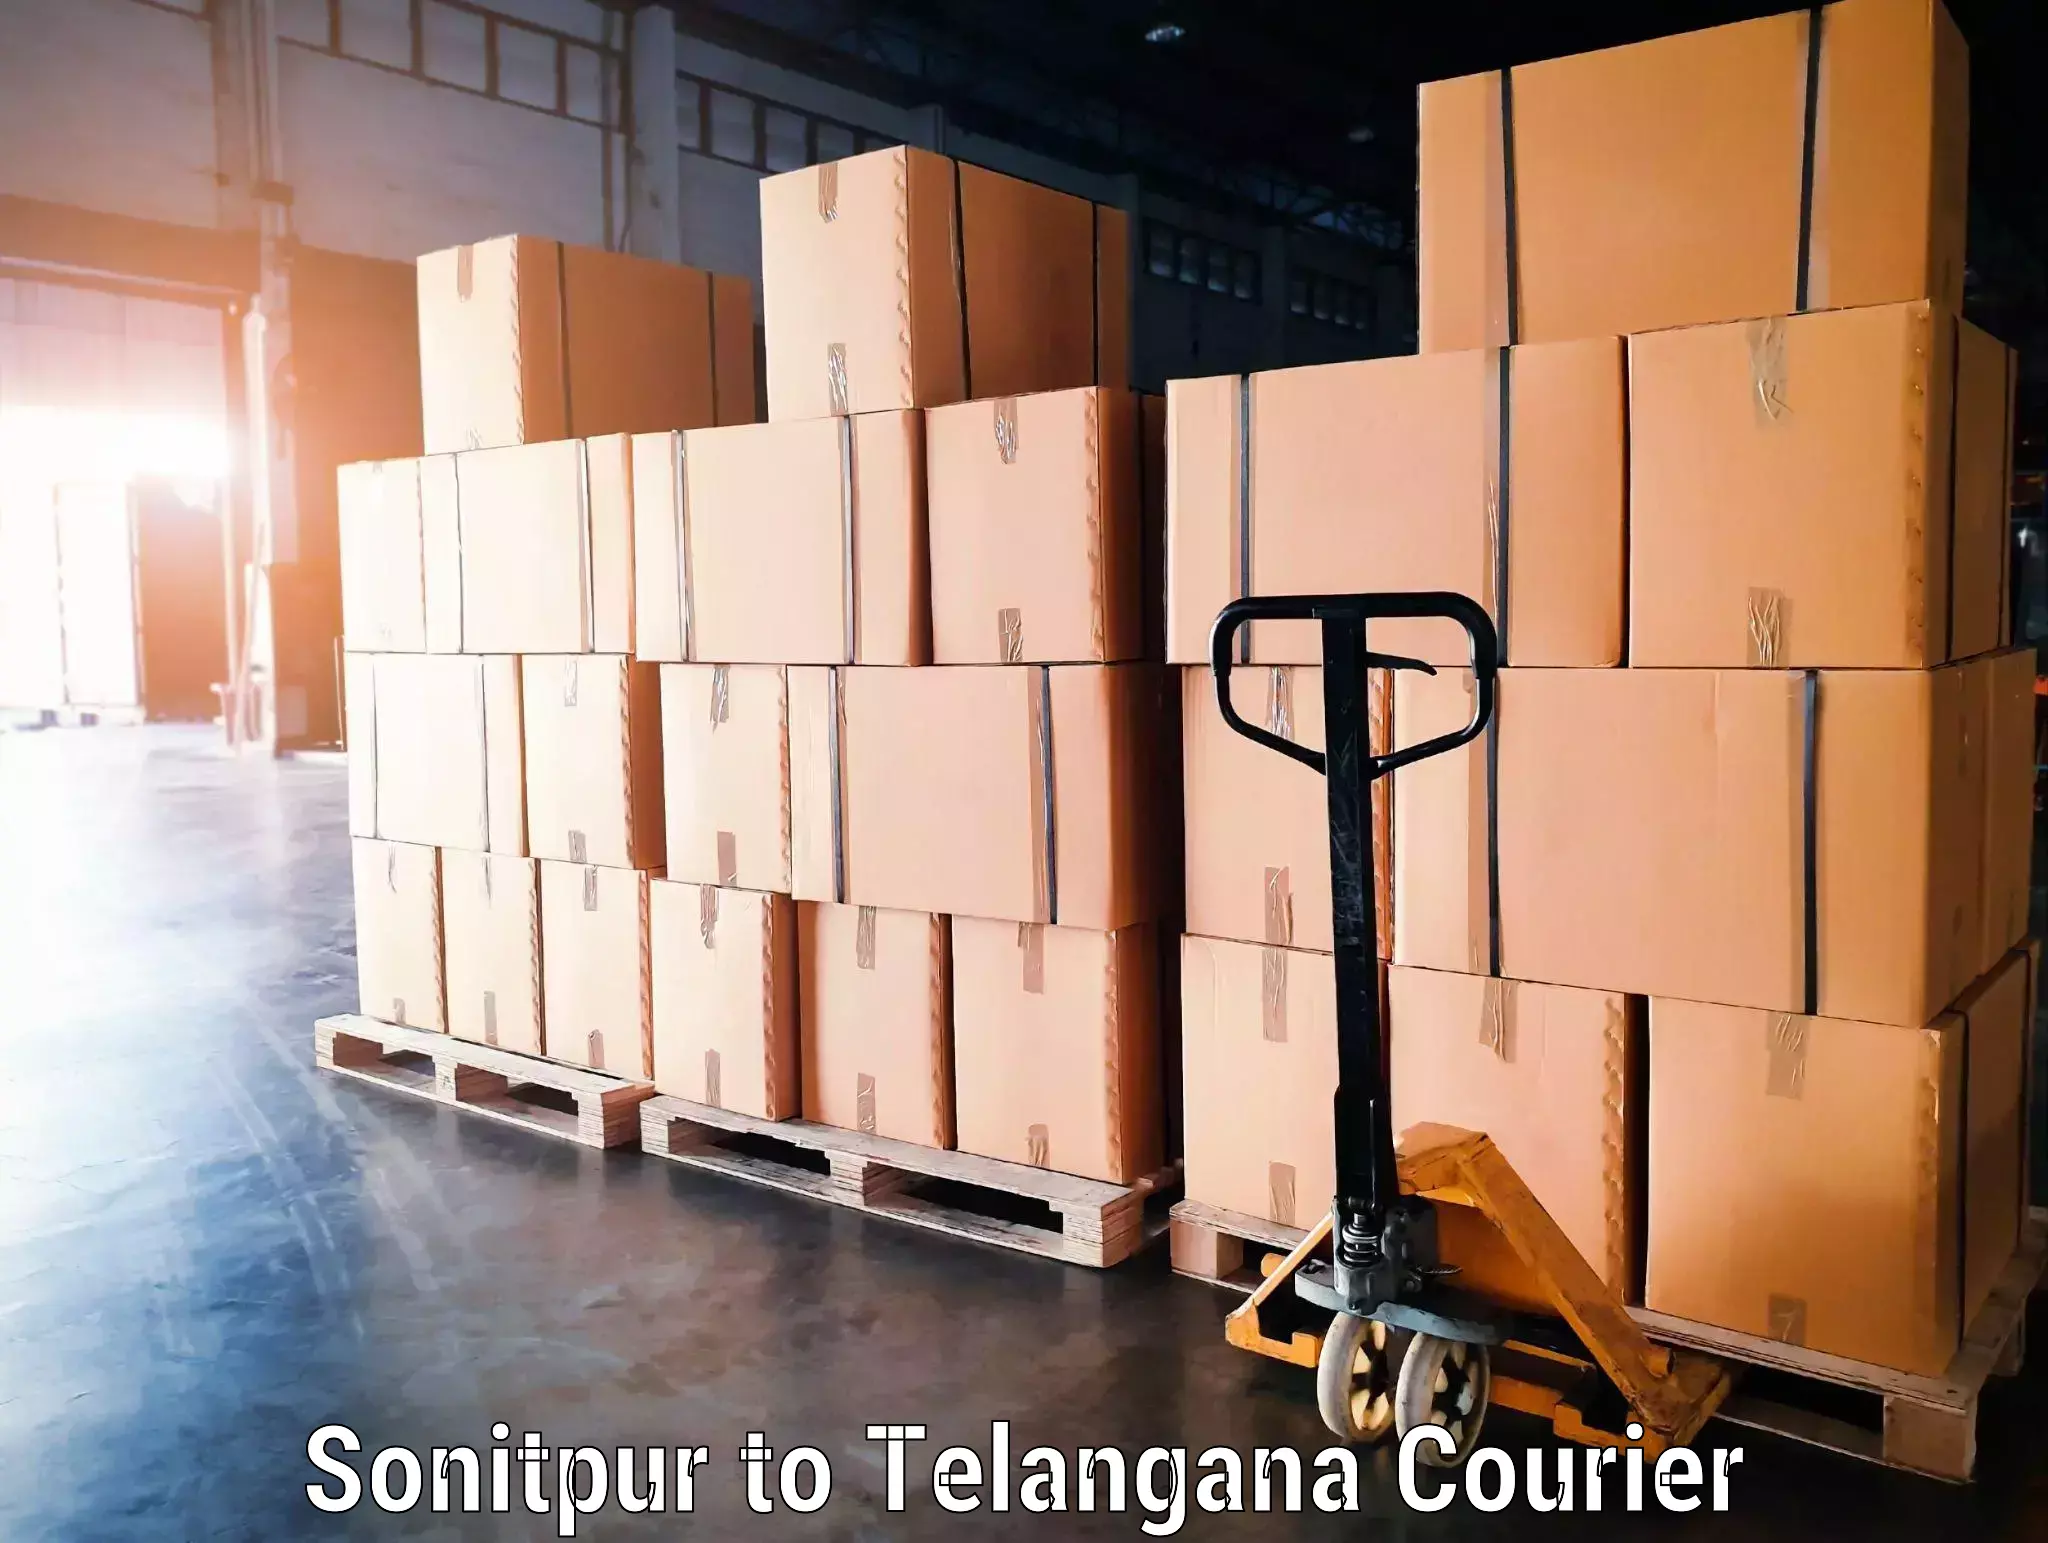 Doorstep luggage collection Sonitpur to Husnabad